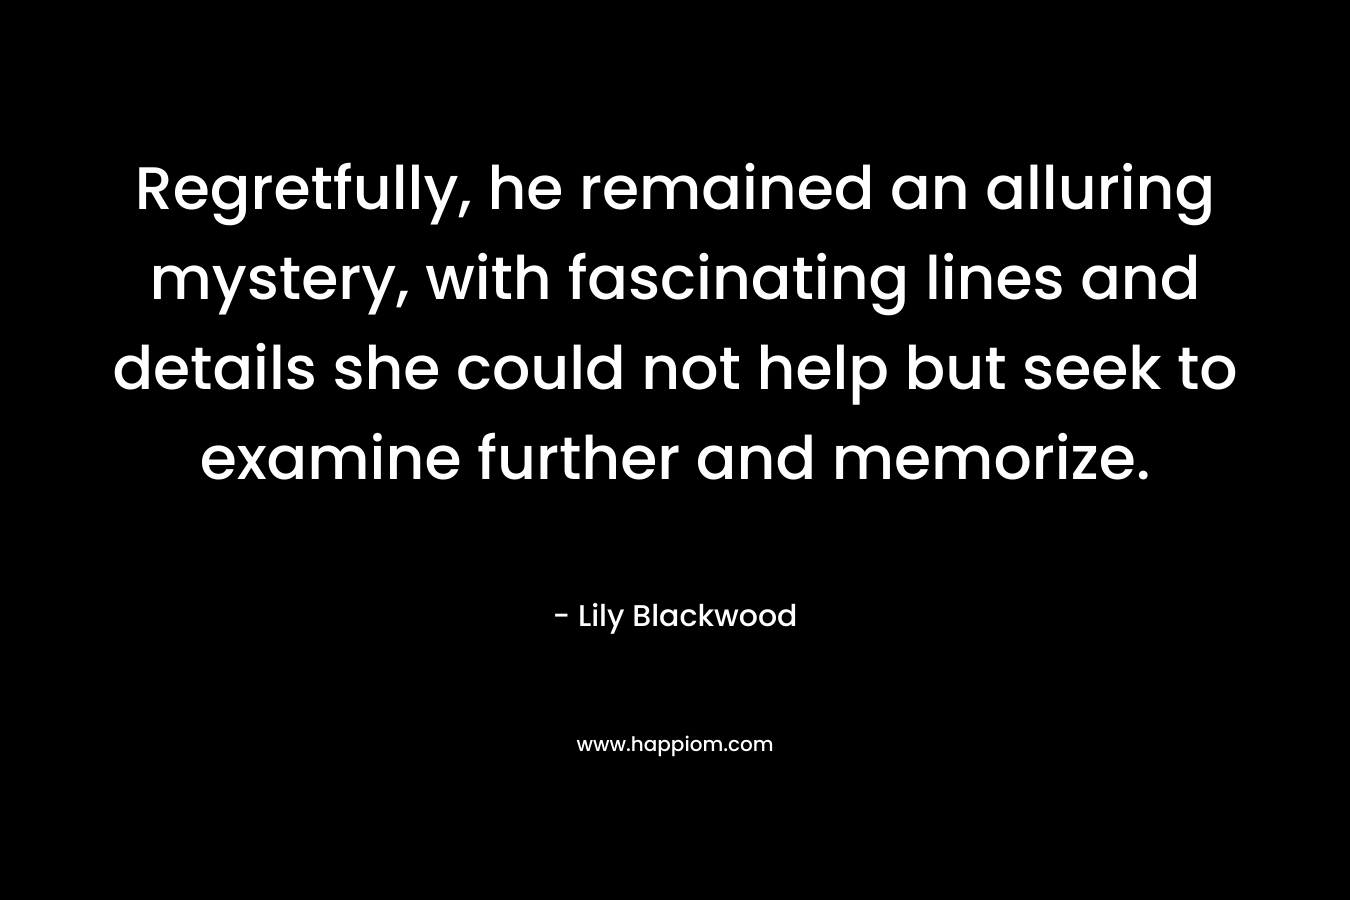 Regretfully, he remained an alluring mystery, with fascinating lines and details she could not help but seek to examine further and memorize. – Lily Blackwood